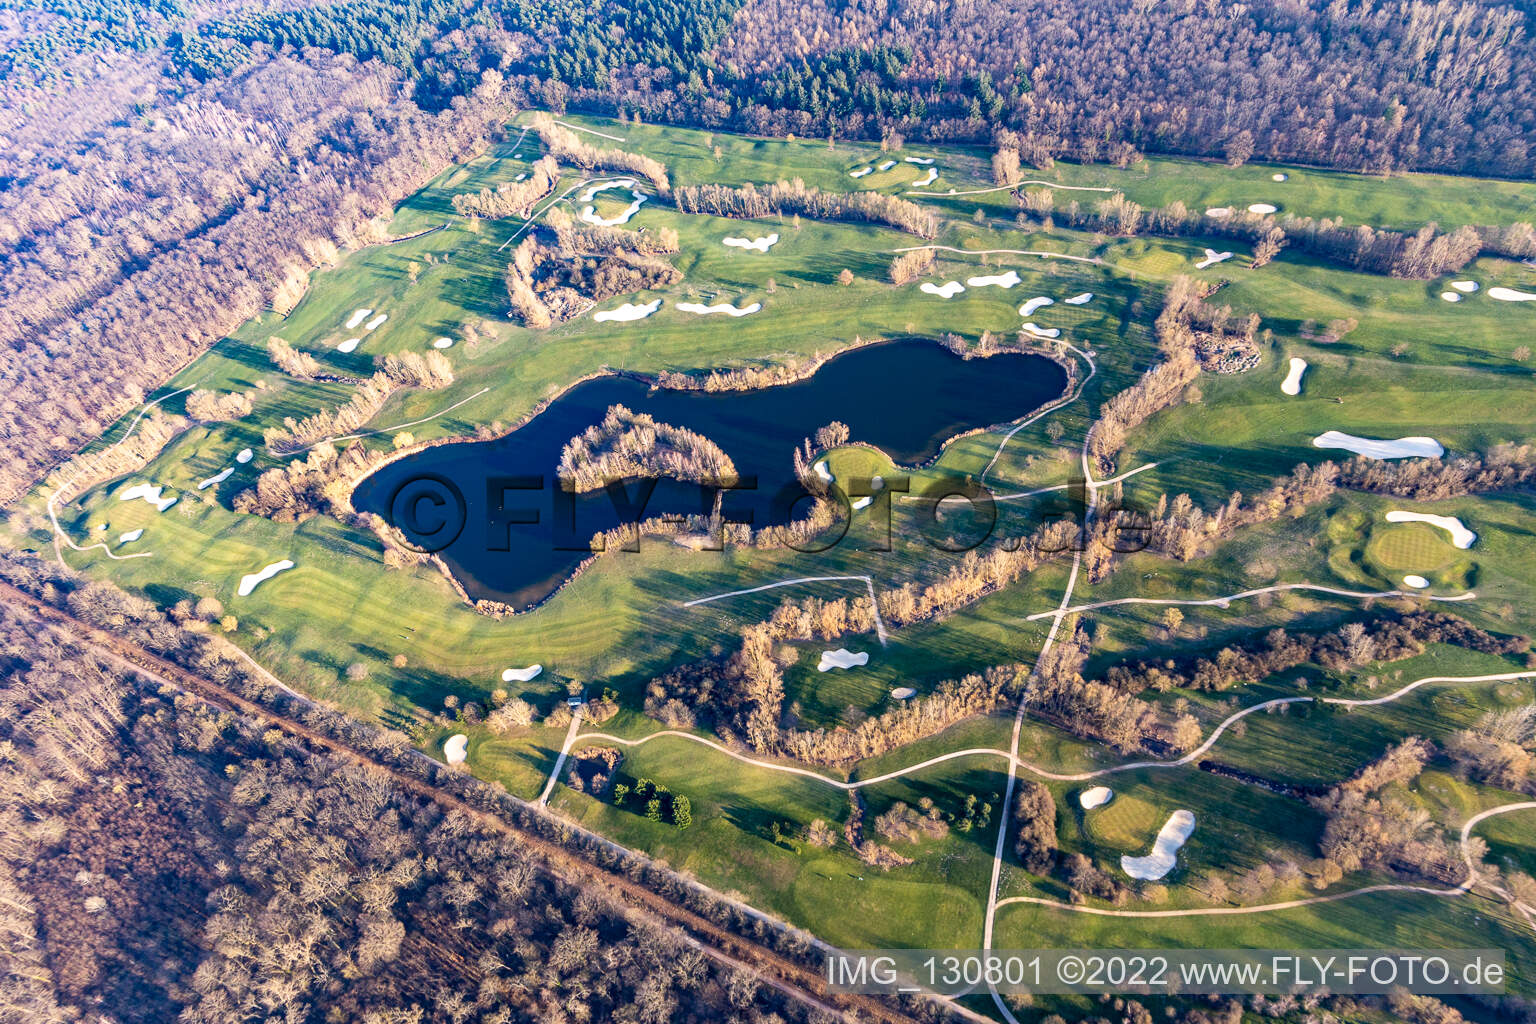 Landgut Dreihof golf course - GOLF absolute in Essingen in the state Rhineland-Palatinate, Germany seen from above